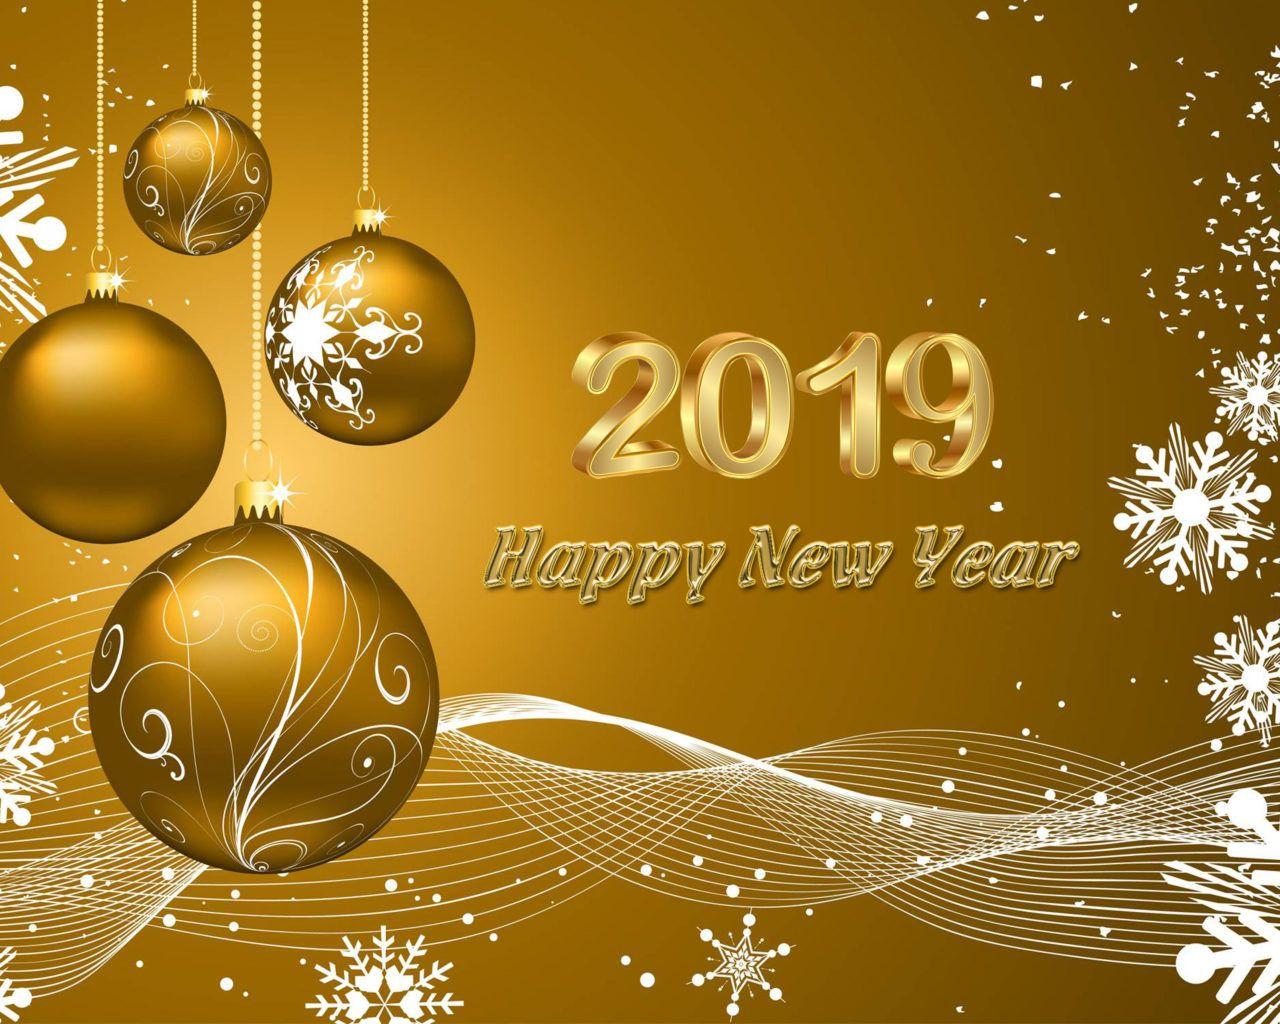 Happy New 2019 Year Wishes Gold Greeting Card Quotes 4K UltraHD